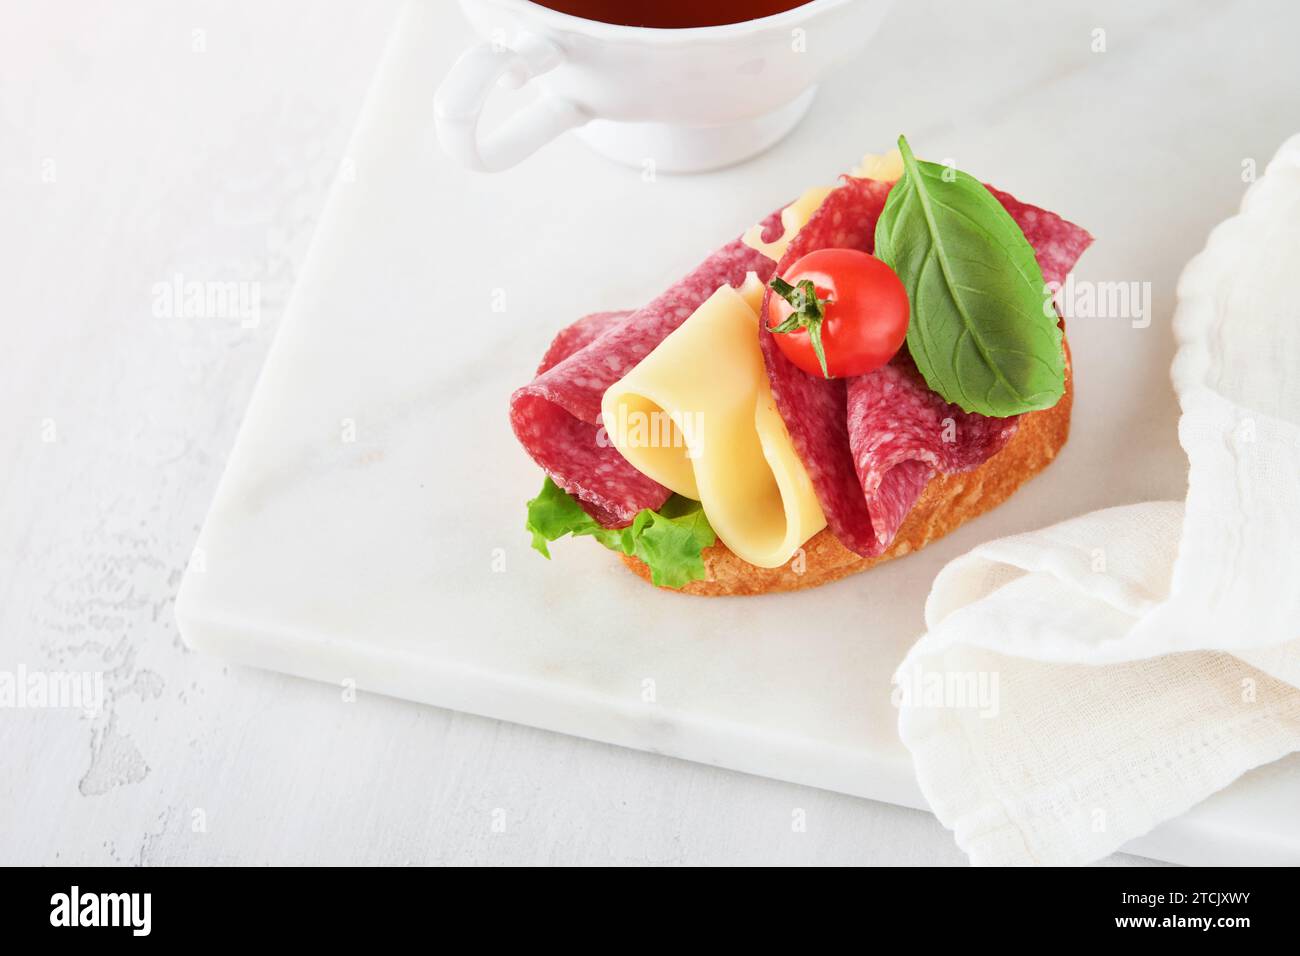 Salami sandwich. Delicious toasted sandwiches with slice salami, cheddar cheese lettuce and tomatoes cherry on white marble background. Restaurant men Stock Photo